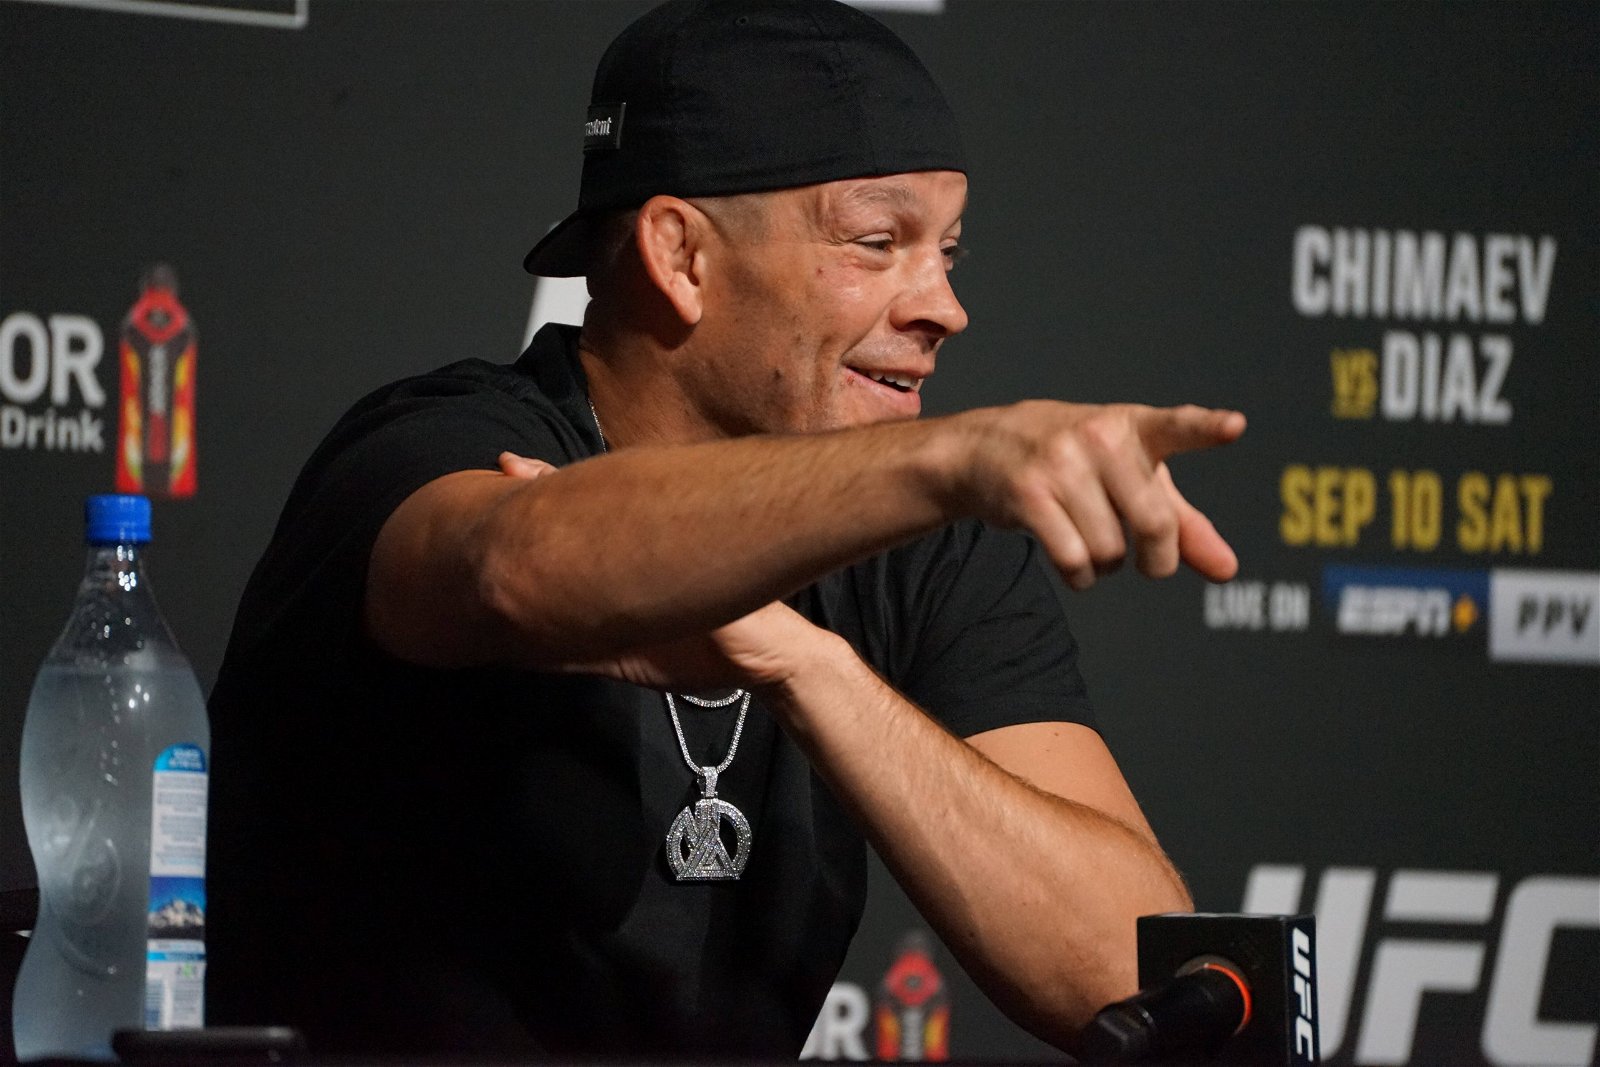 Details: Nate Diaz earns ‘well into the eight figures’ against Jake Paul in career high payday